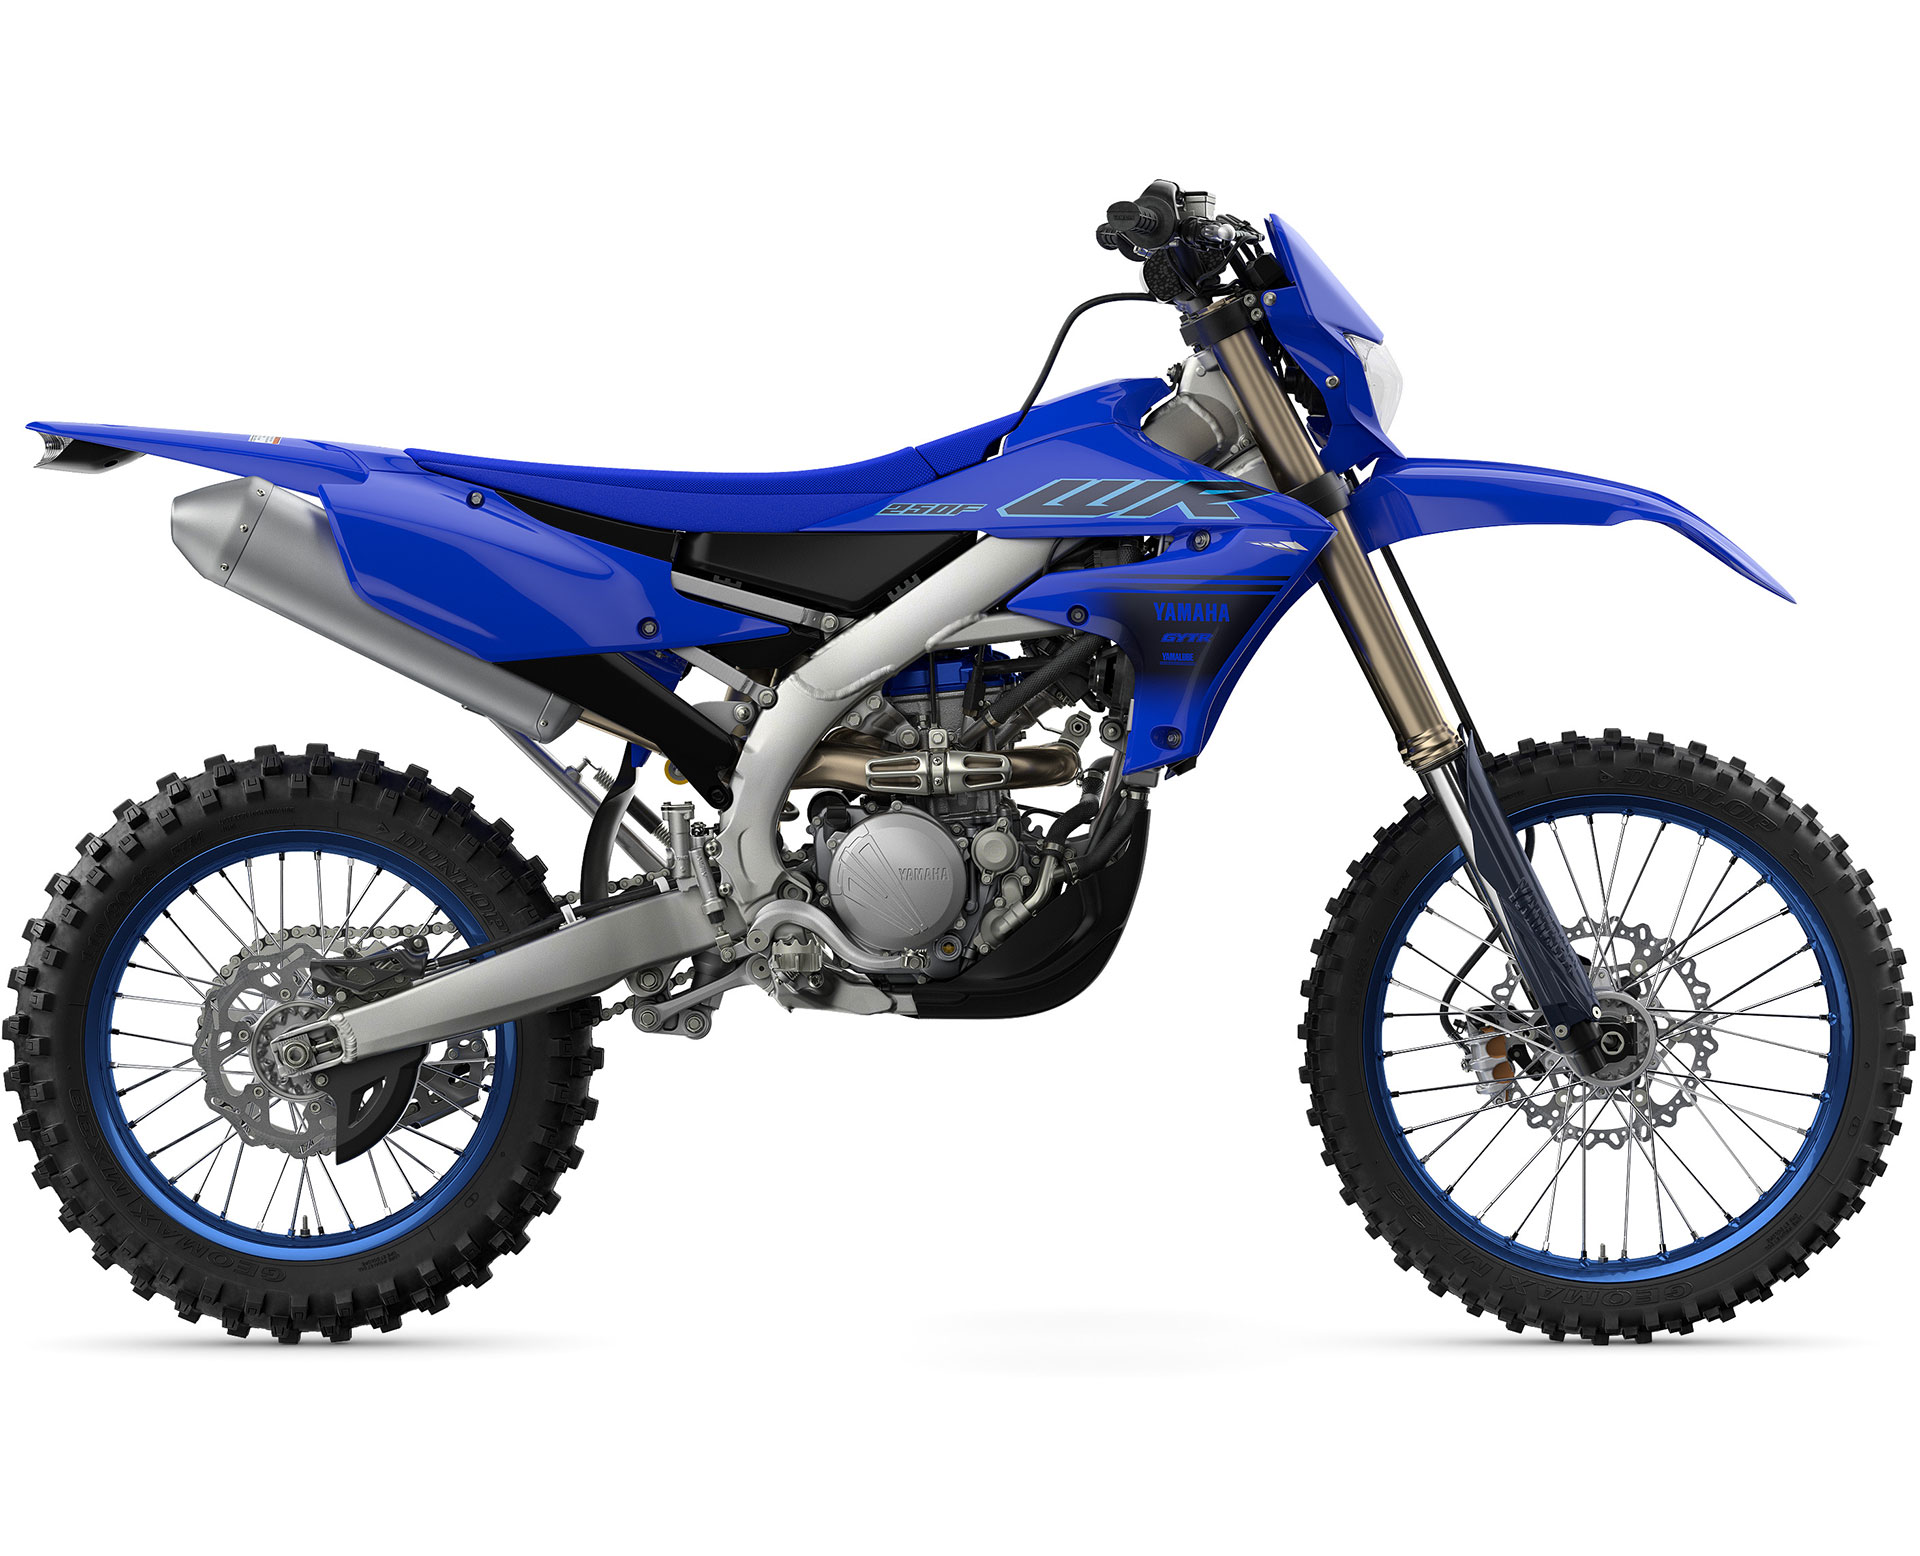 Thumbnail of your customized 2024 WR250F